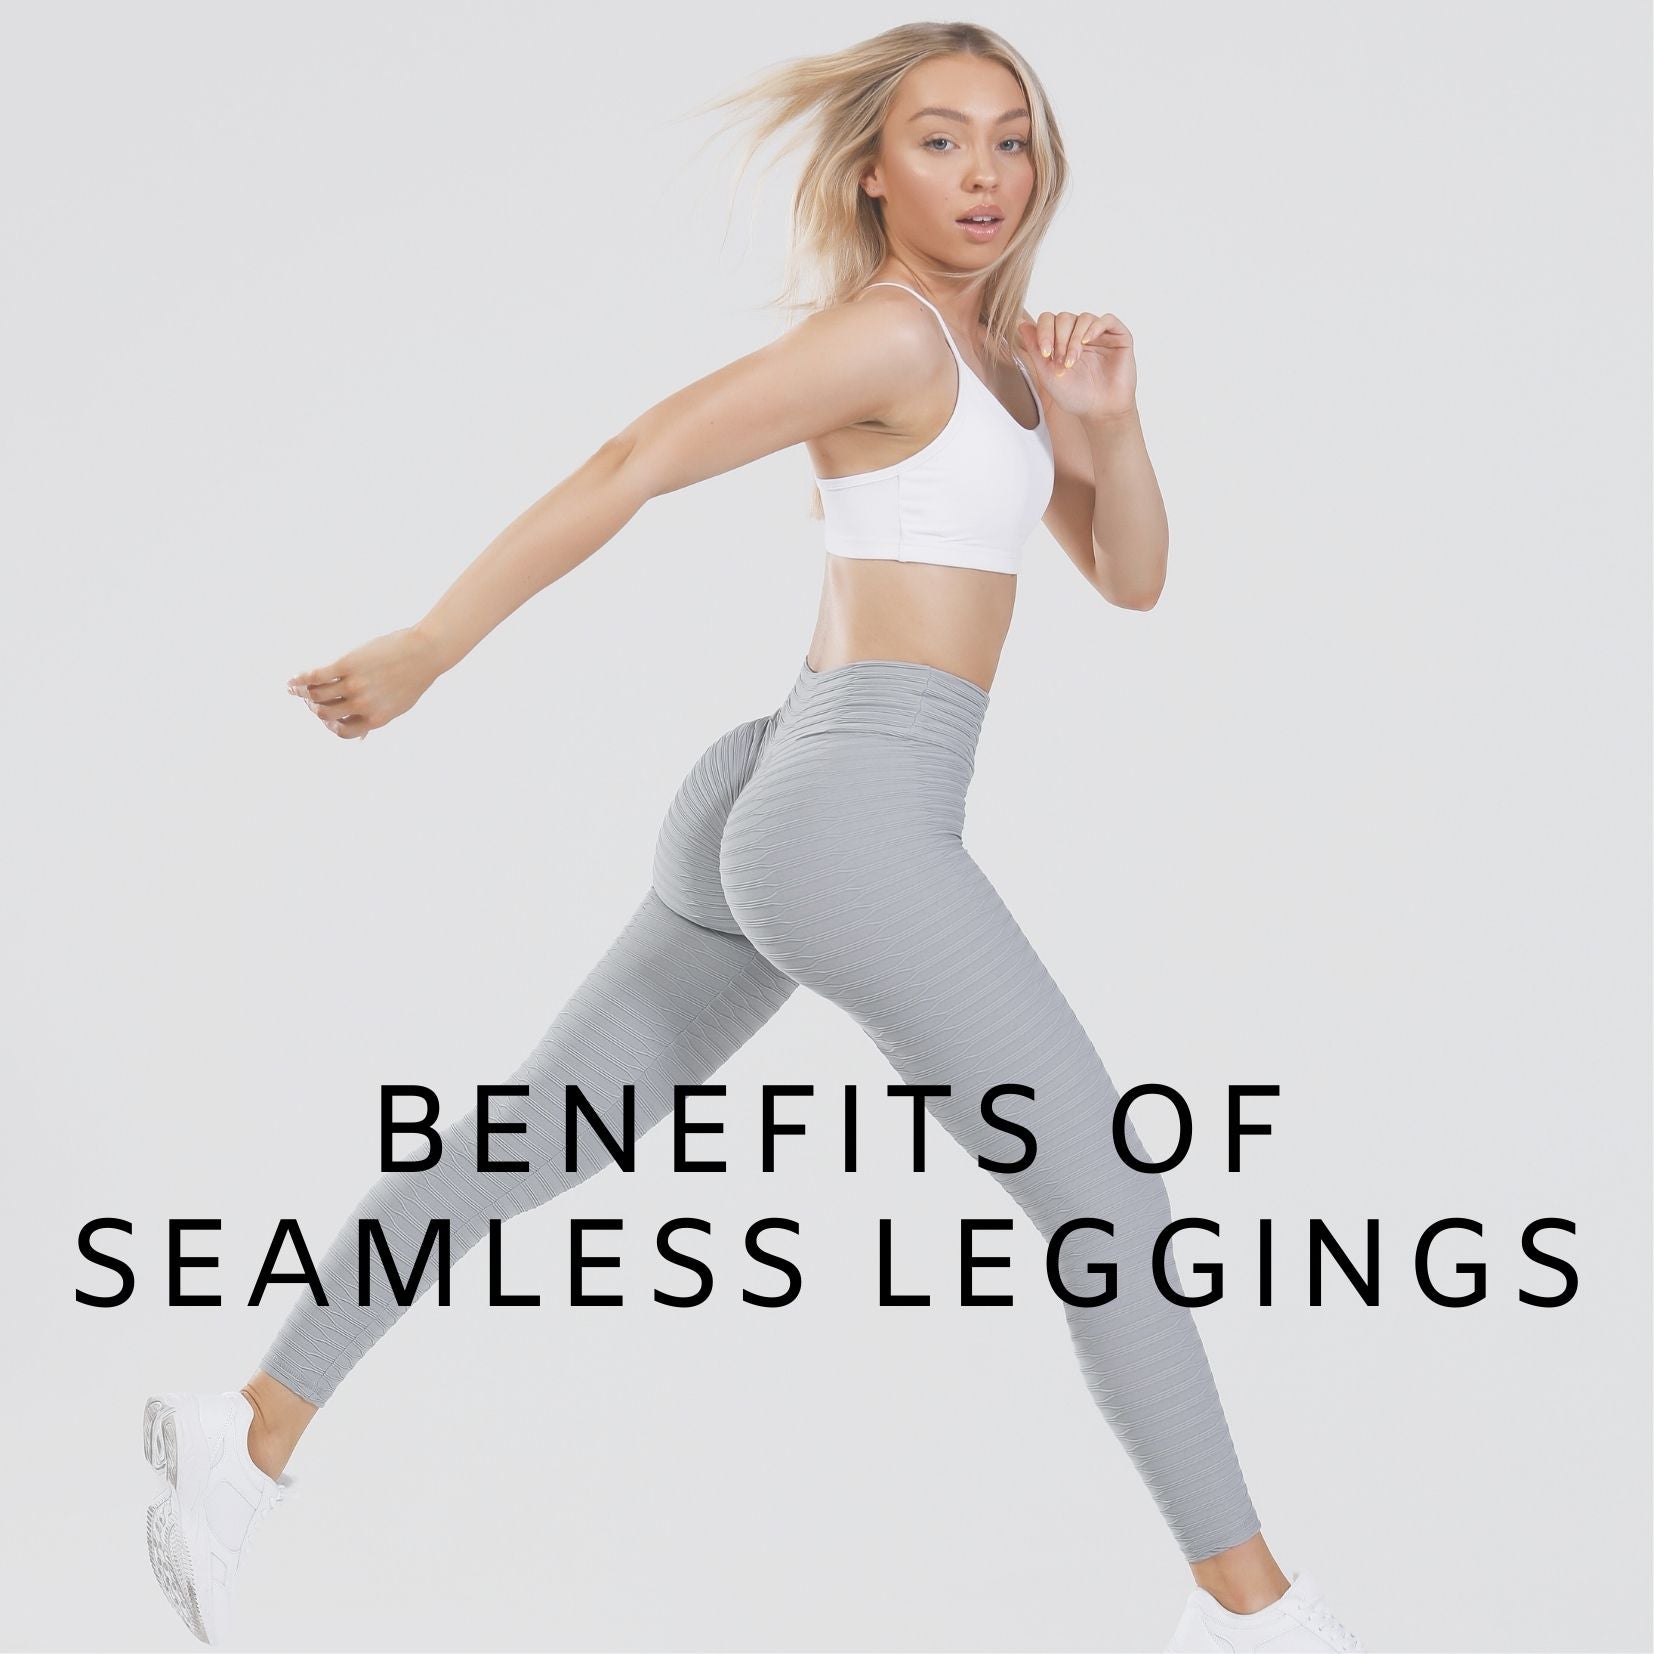 What are the Benefits of Seamless Gym Leggings?